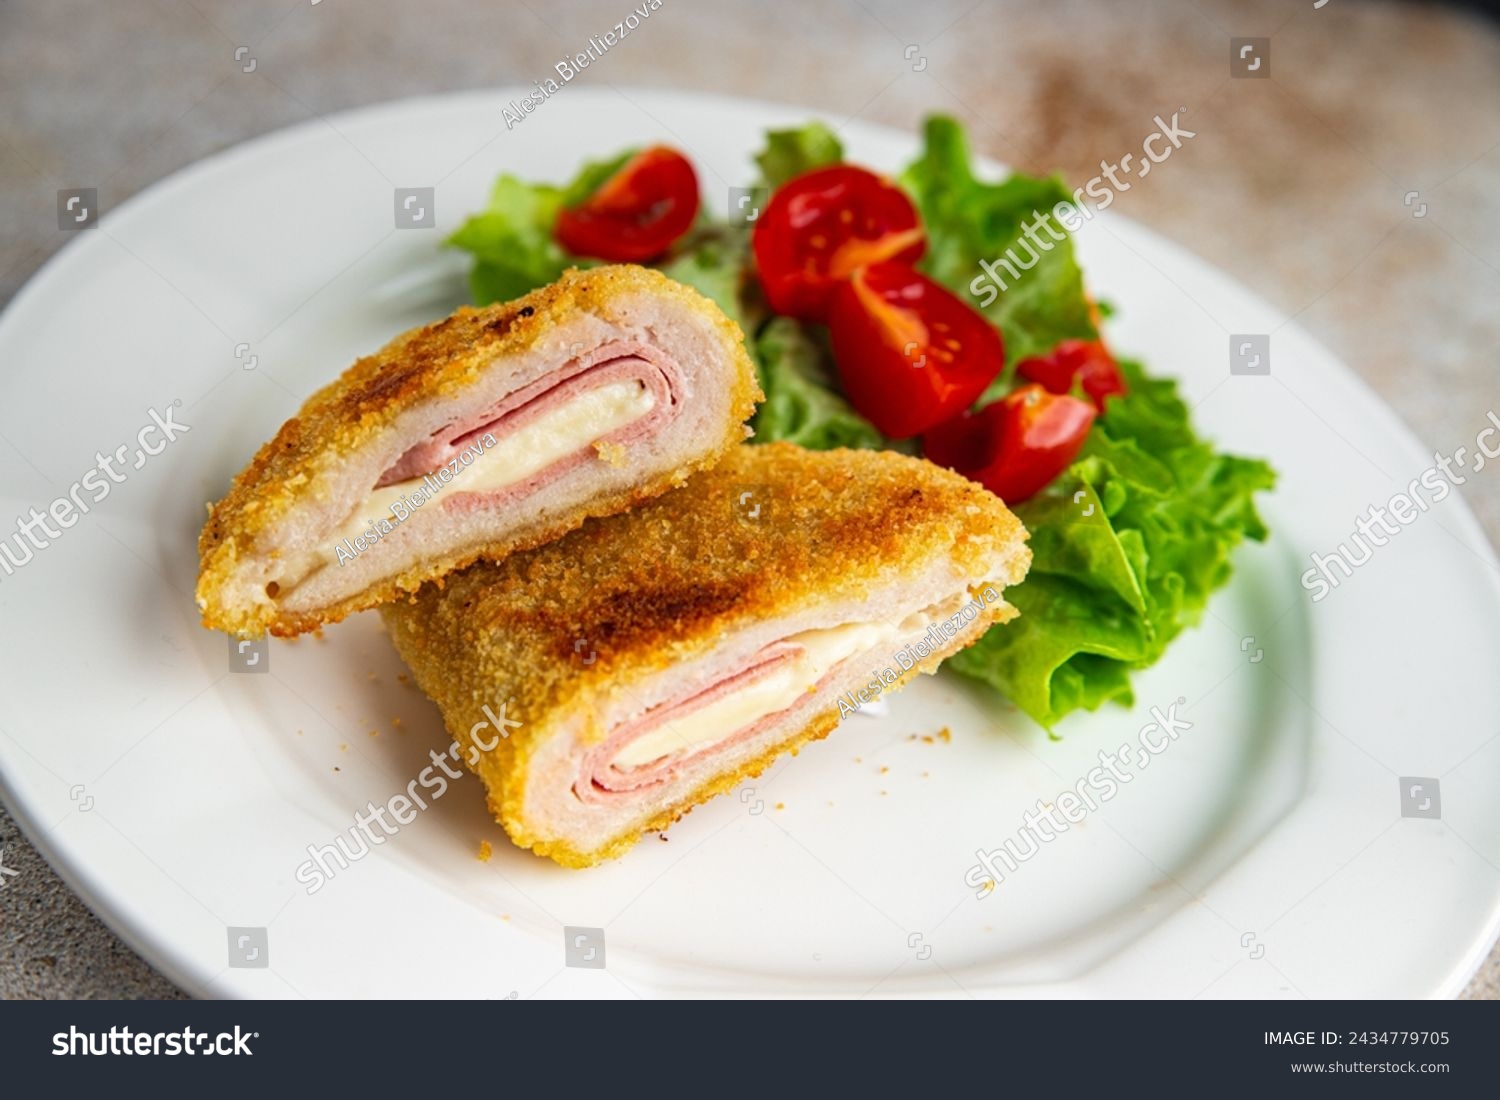 cutlet cordon bleu chicken meat food tasty eating cooking meal food snack on the table copy space food background rustic top view #2434779705